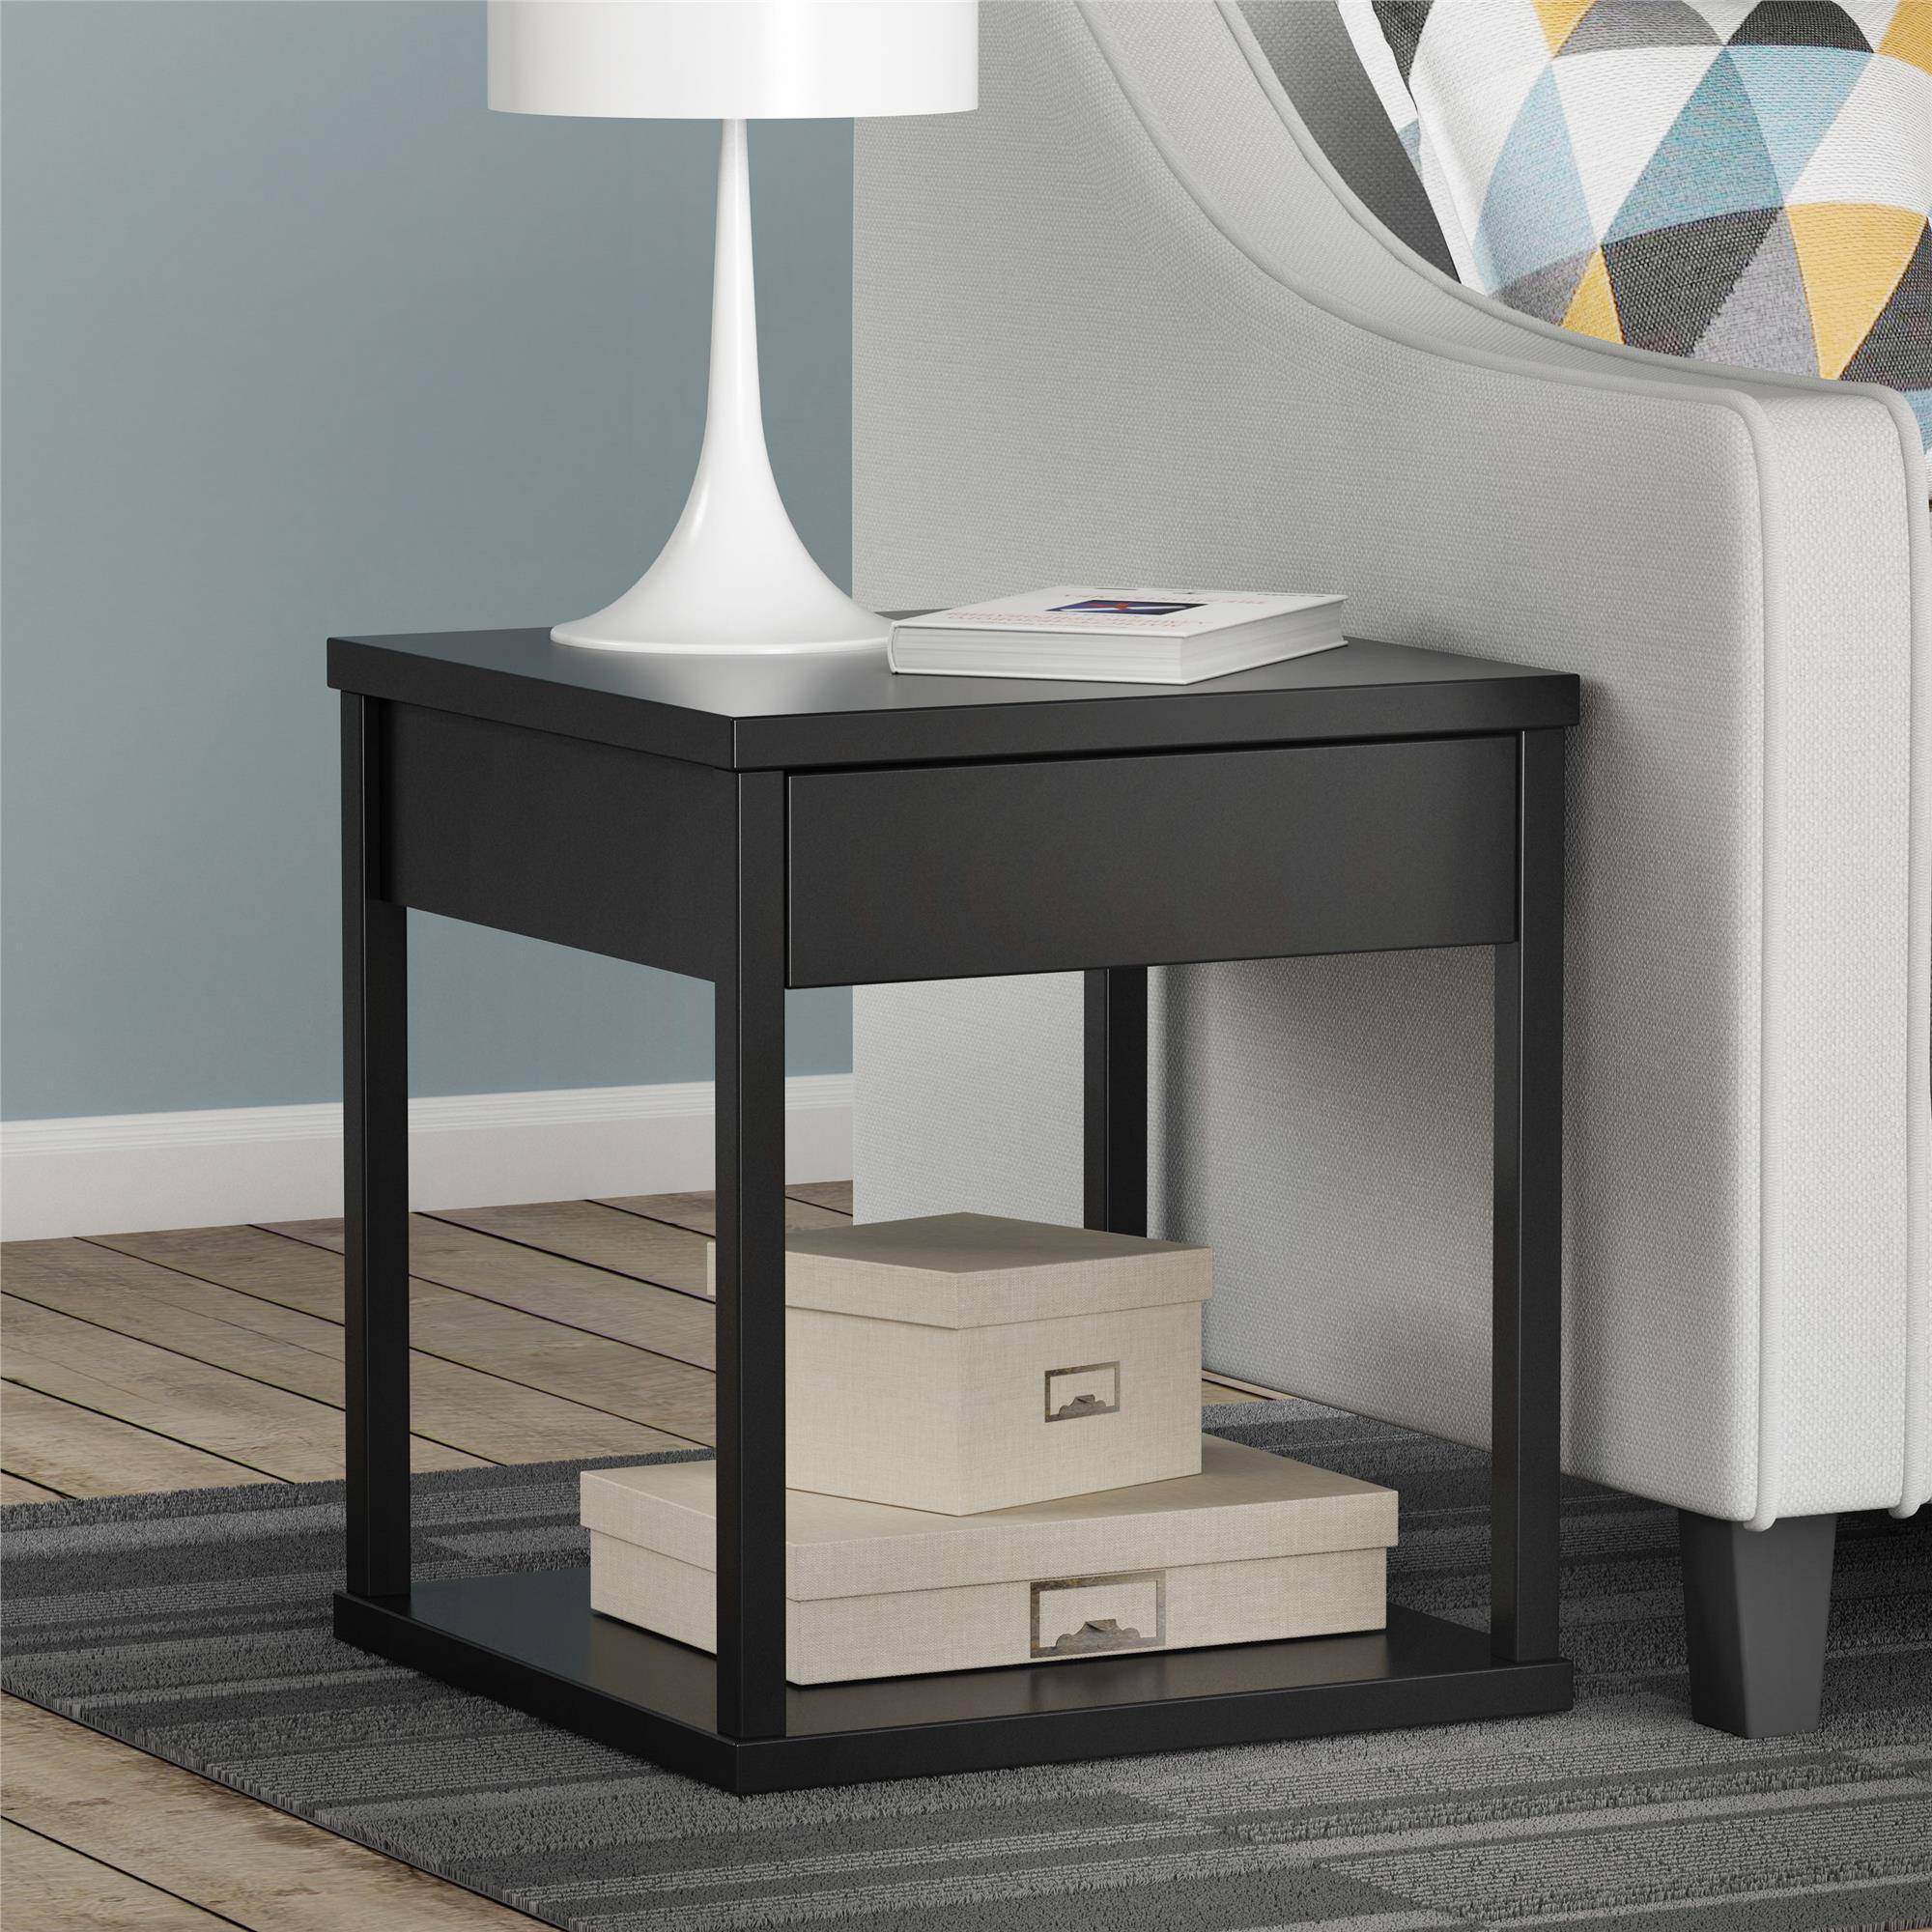 mainstays drawer nightstand end table black ebony ash tables set sauder hill furniture modern square dining quebec manufacturers ashley bailey unfinished wood computer armoire